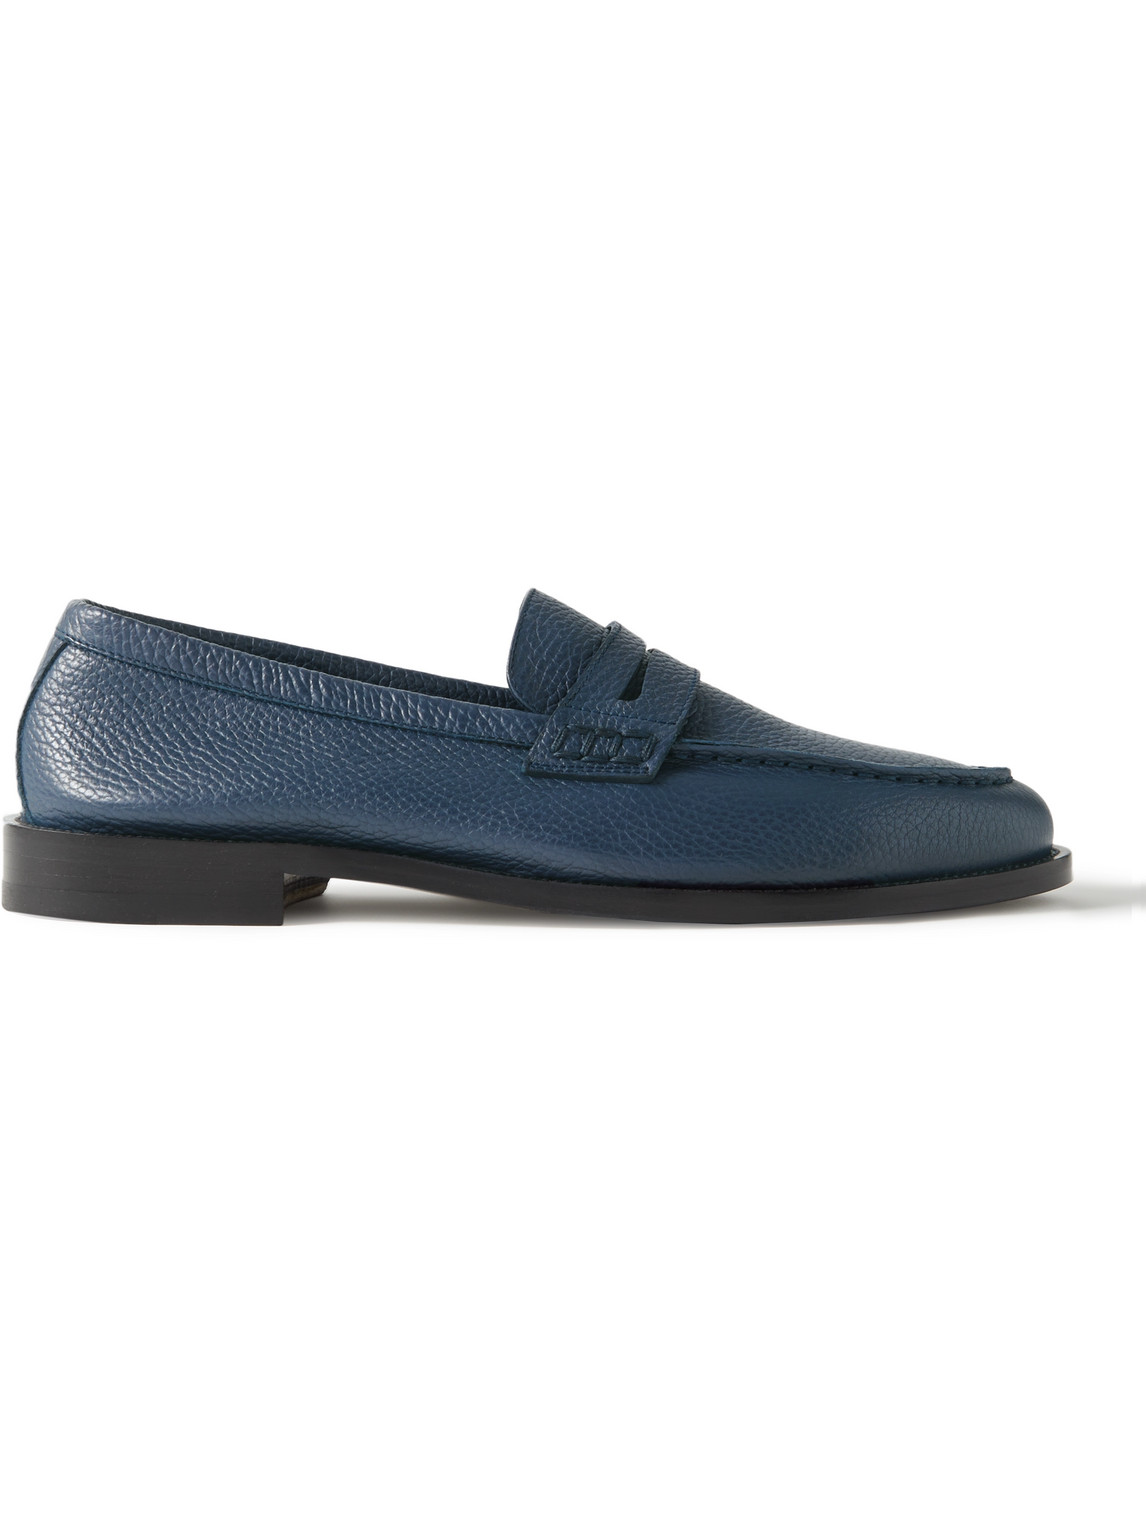 Manolo Blahnik Perry Full-Grain Leather Penny Loafers